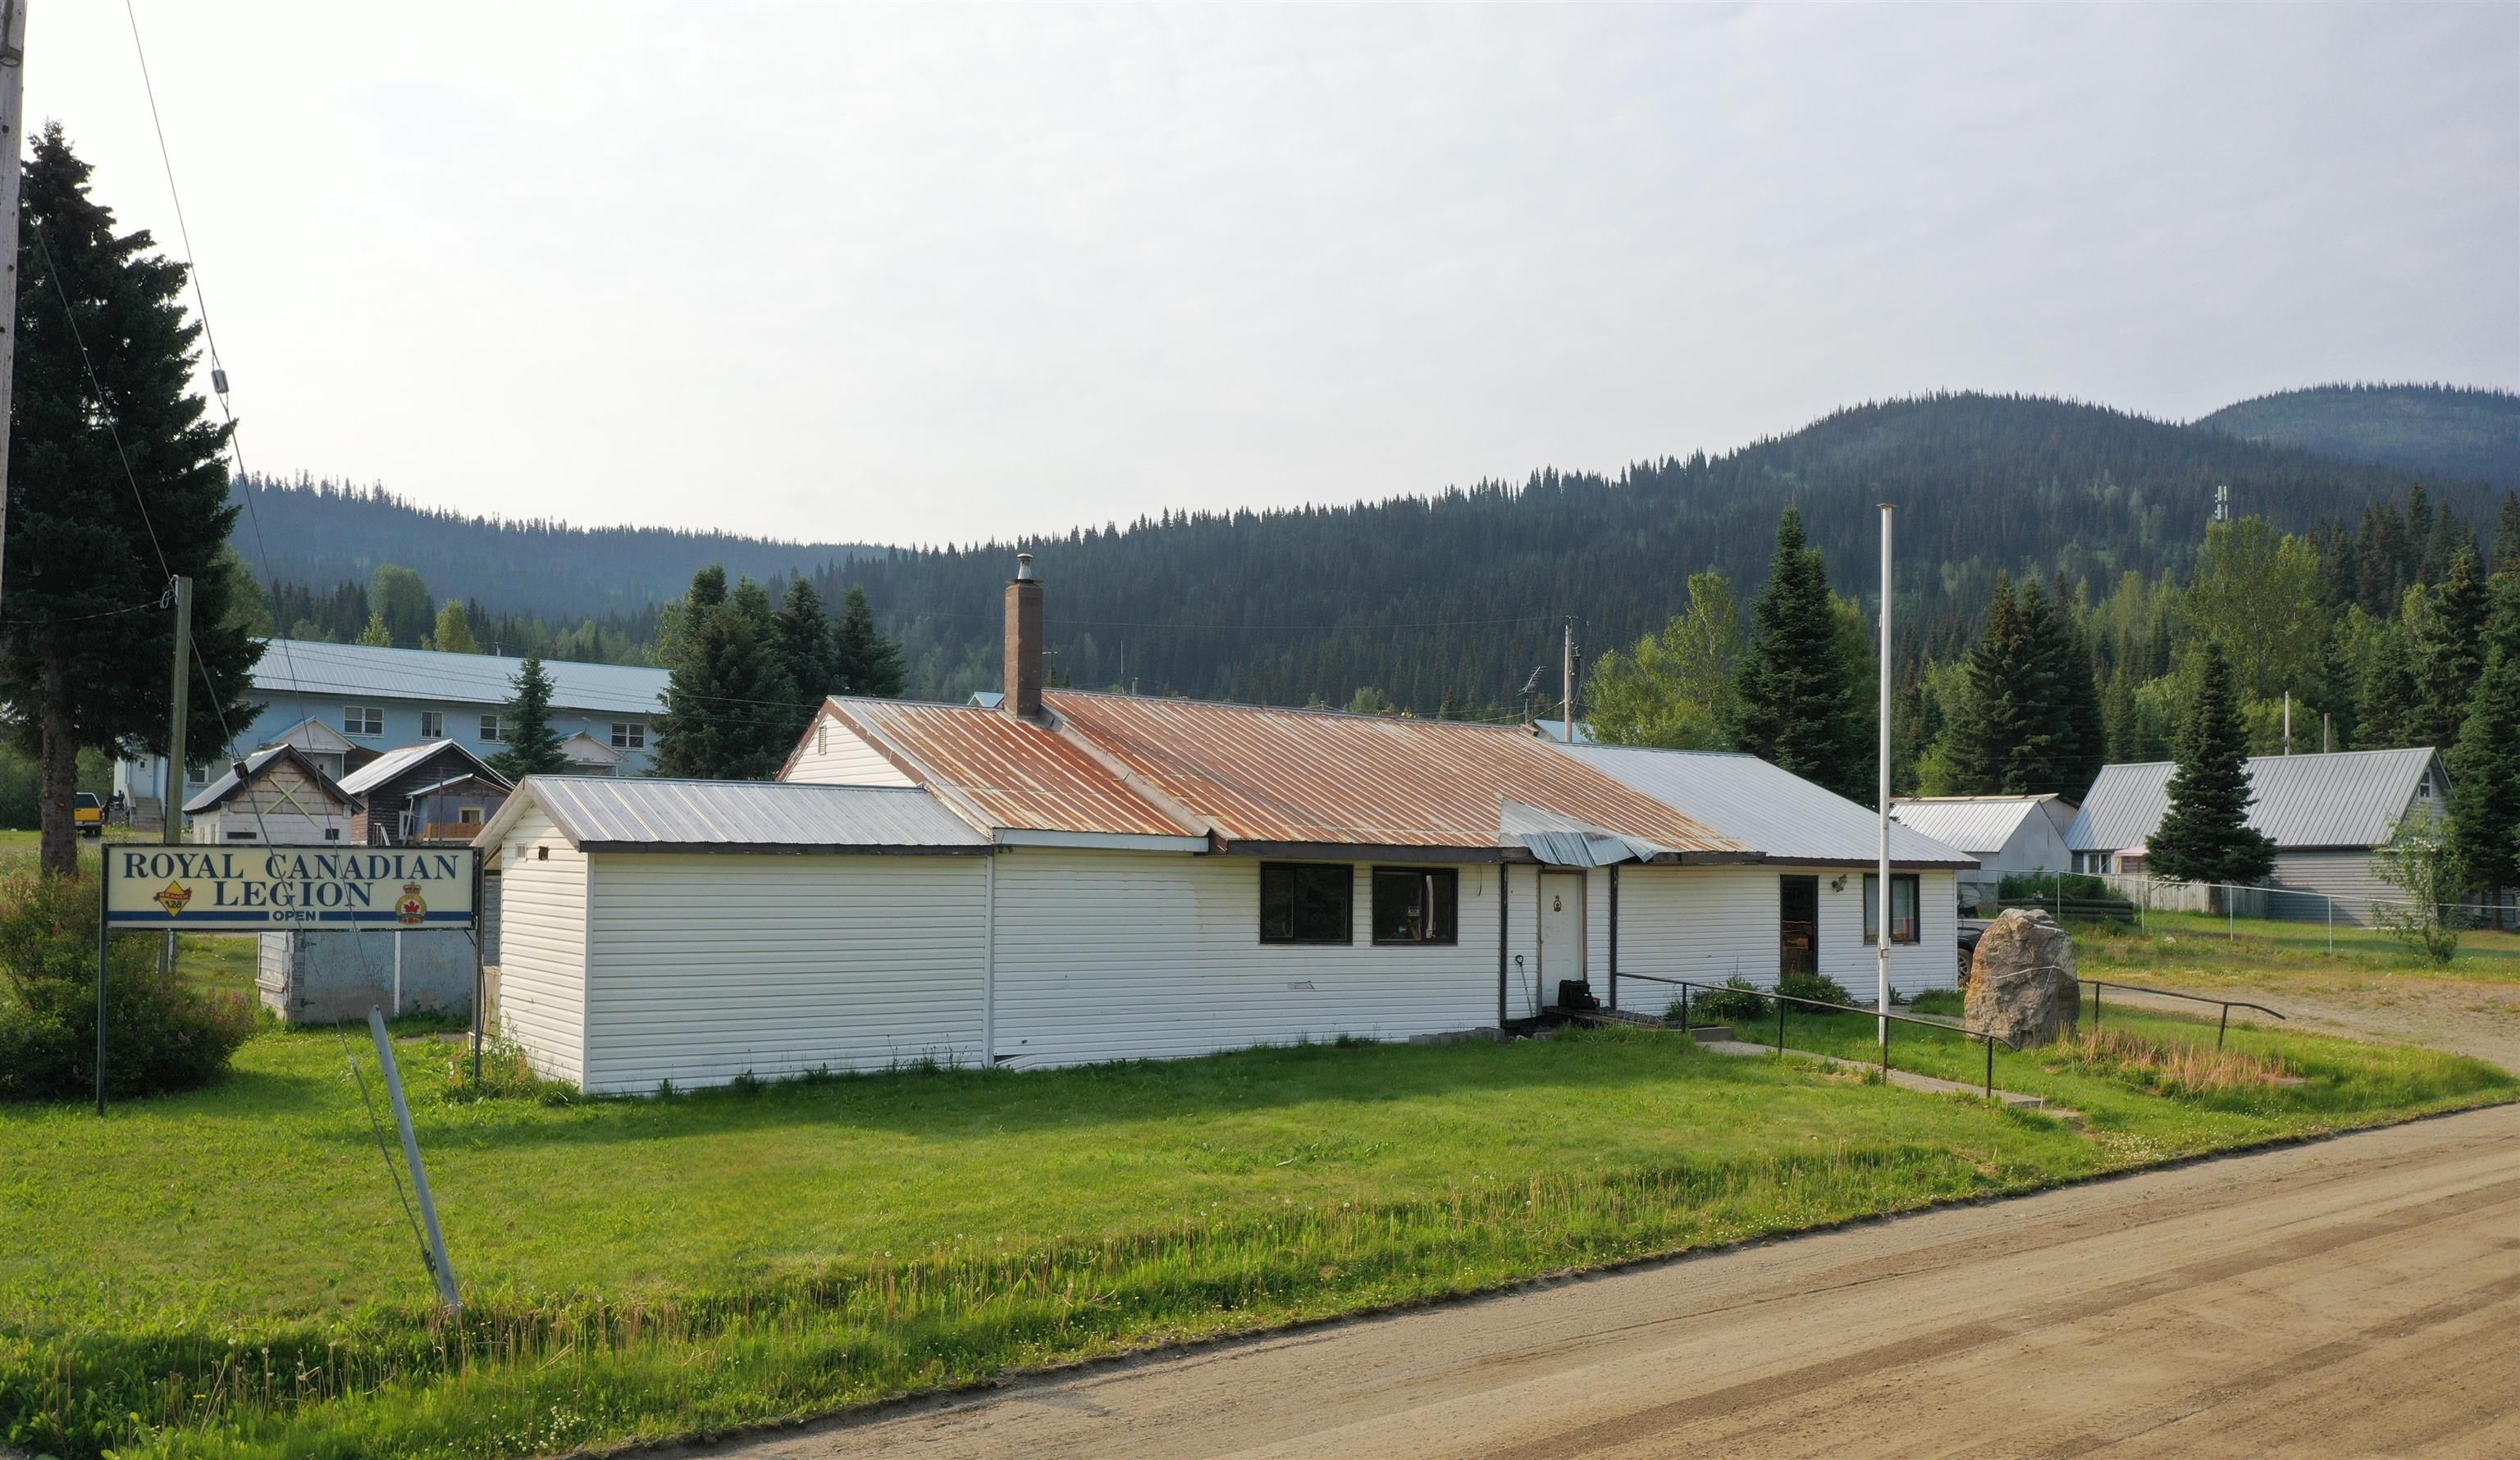 Main Photo: 3948 GOLD QUARTZ Drive in Wells: Wells/Barkerville Business for sale (Quesnel)  : MLS®# C8052833